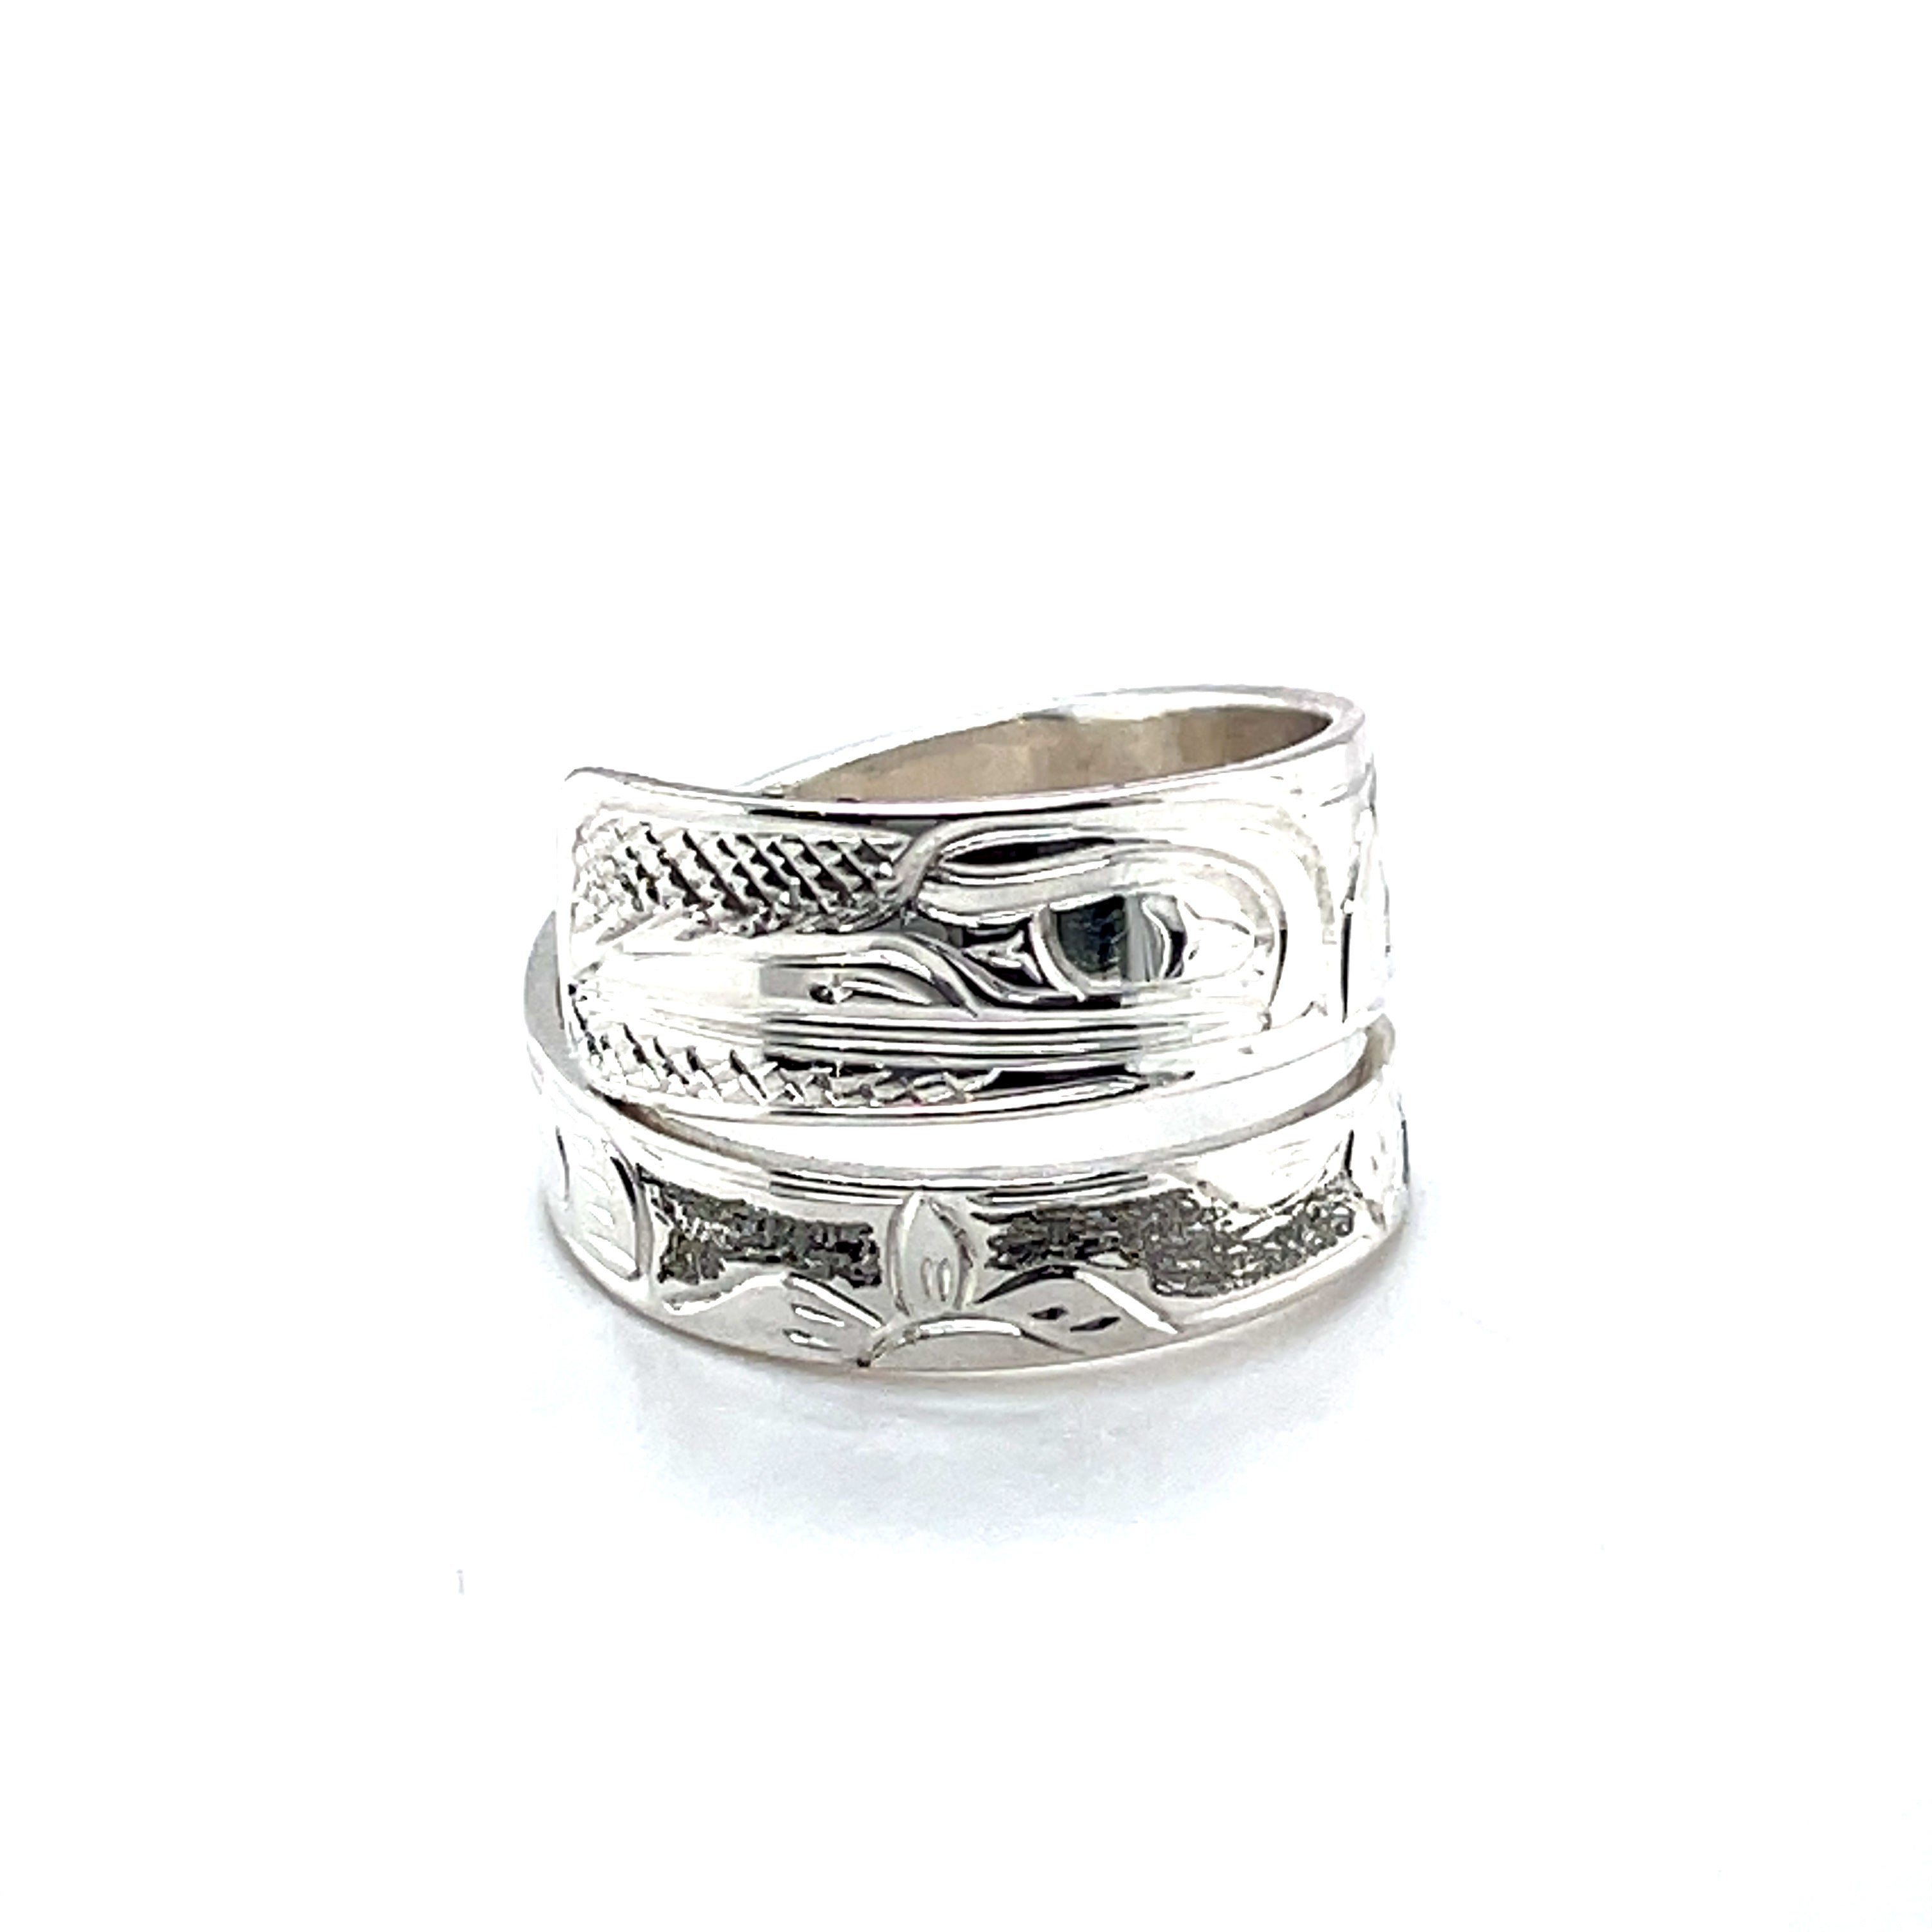 Ring - Sterling Silver - Wrap - Hummingbird - Size 8